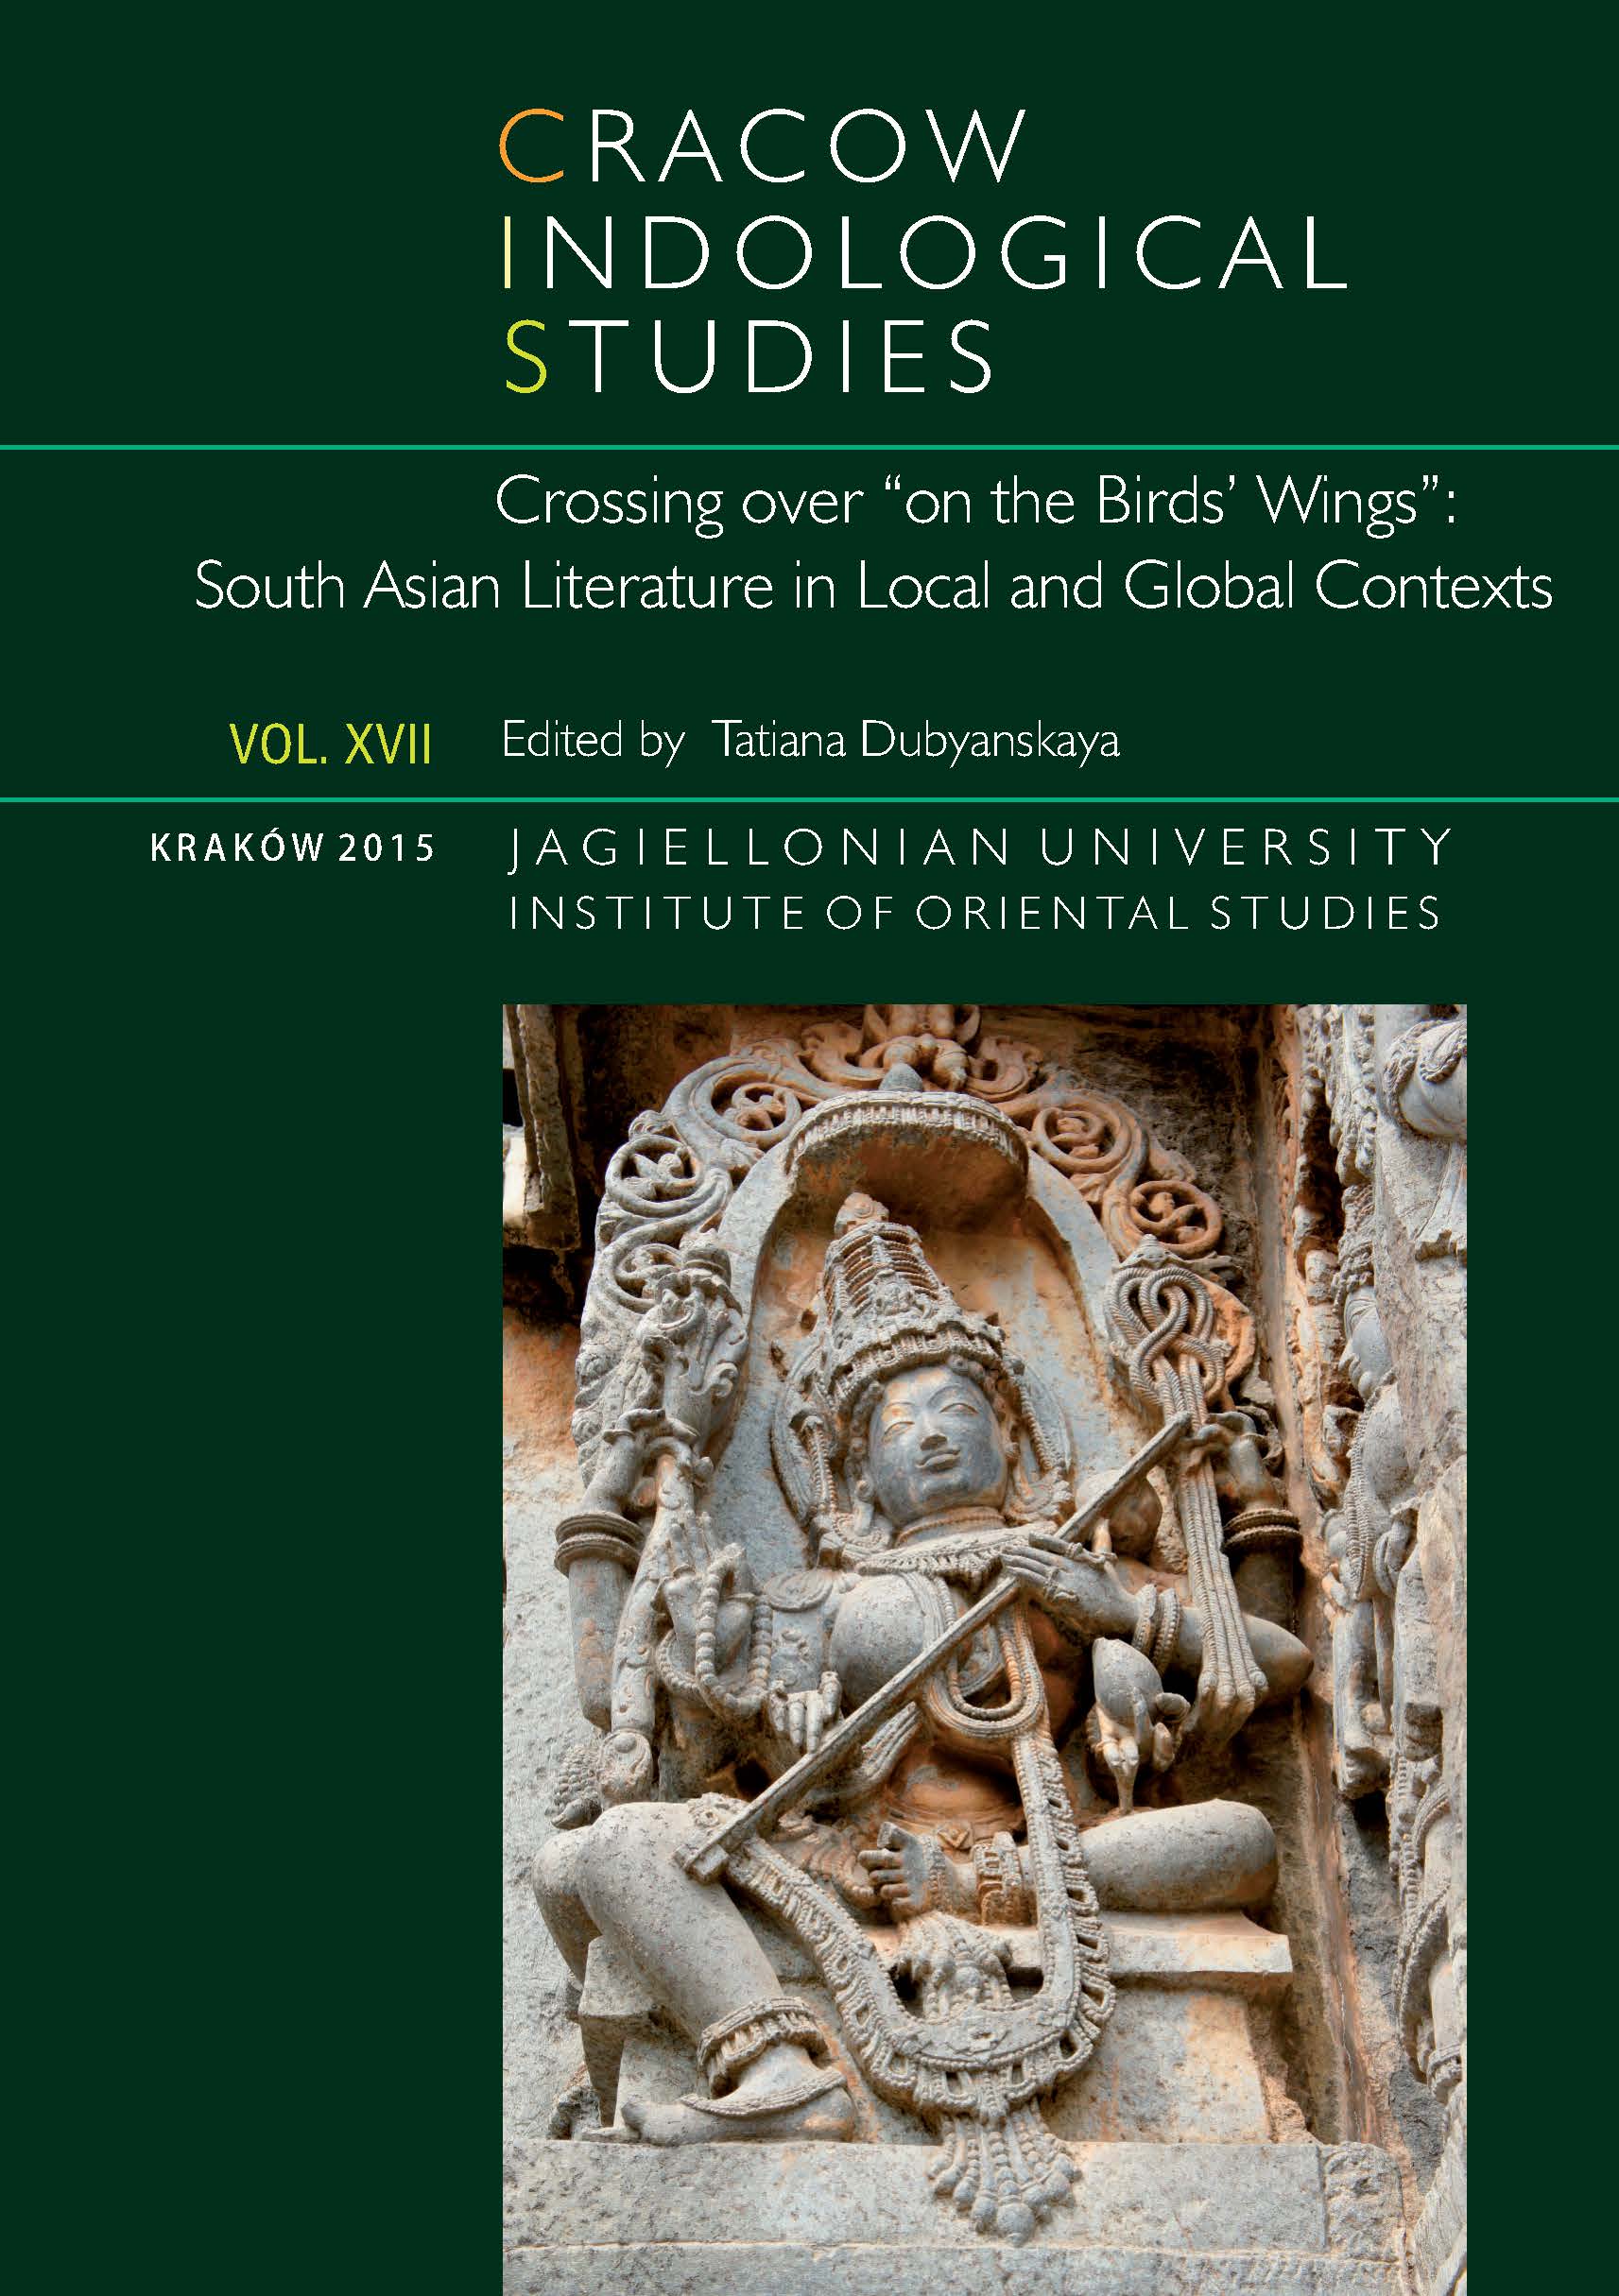 					View Vol. 17 (2015): Crossing over “on the Birds’ Wings”: South Asian Literature in Local and Global Contexts
				